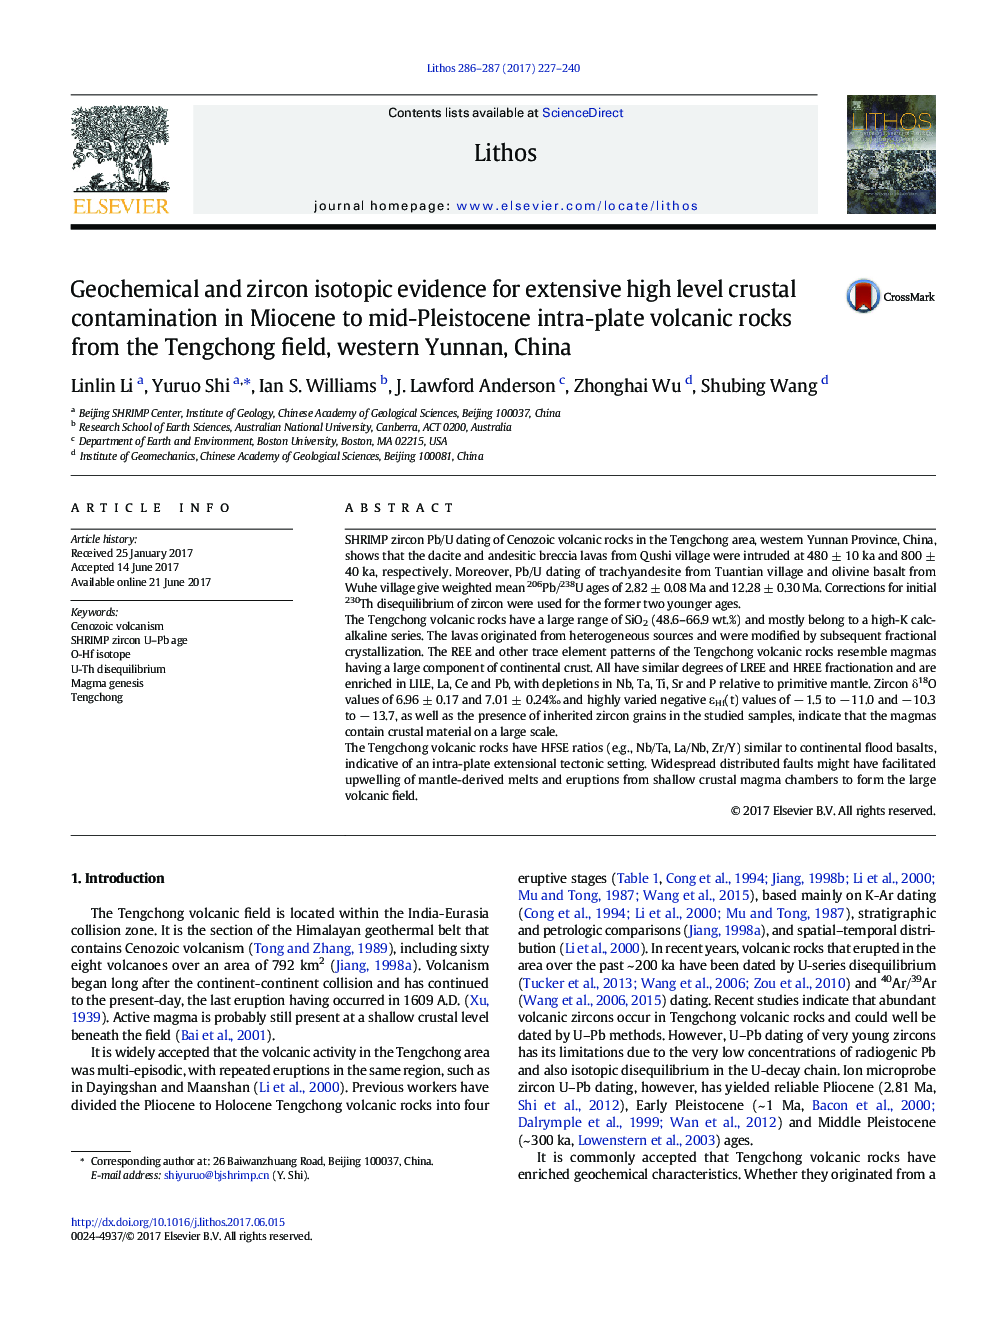 Geochemical and zircon isotopic evidence for extensive high level crustal contamination in Miocene to mid-Pleistocene intra-plate volcanic rocks from the Tengchong field, western Yunnan, China